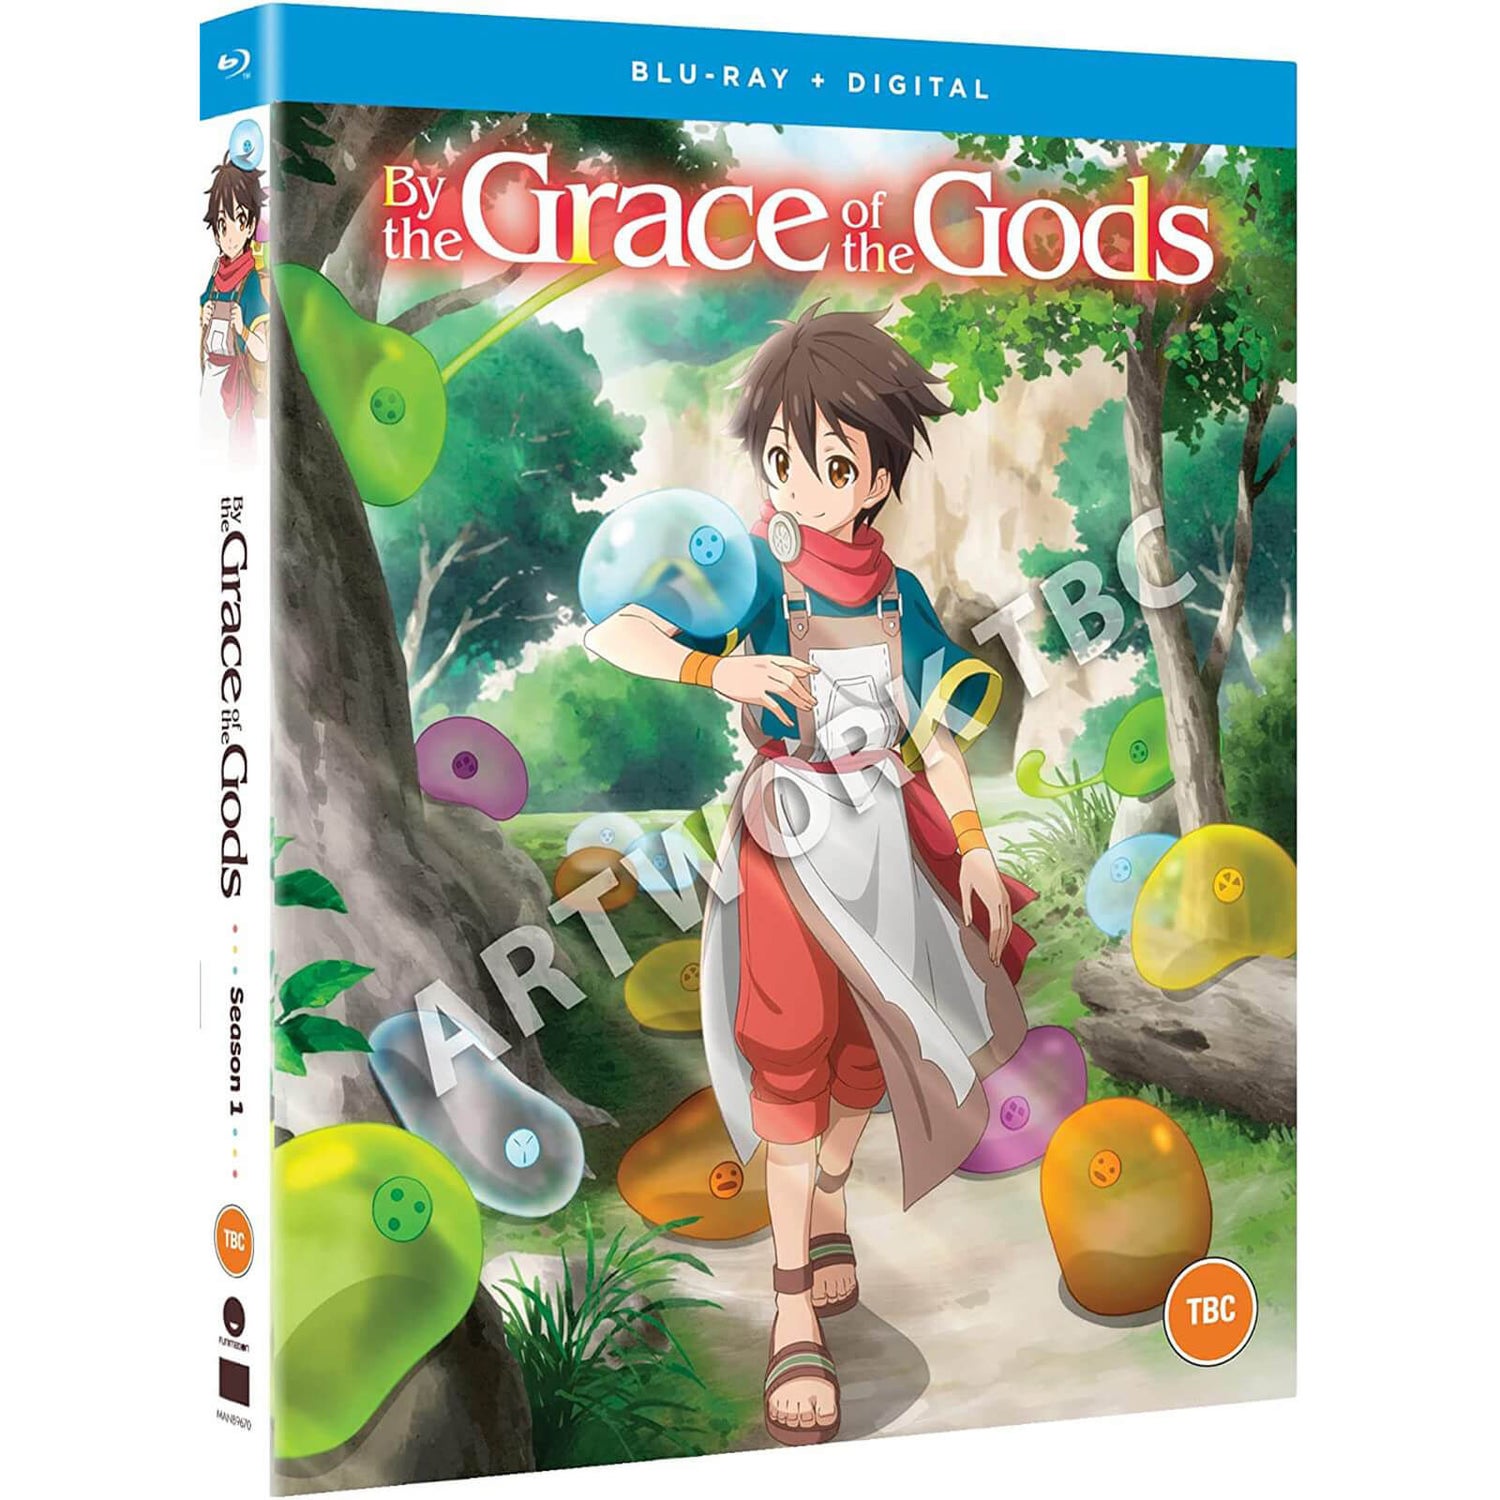 By the Grace of the Gods Season 1